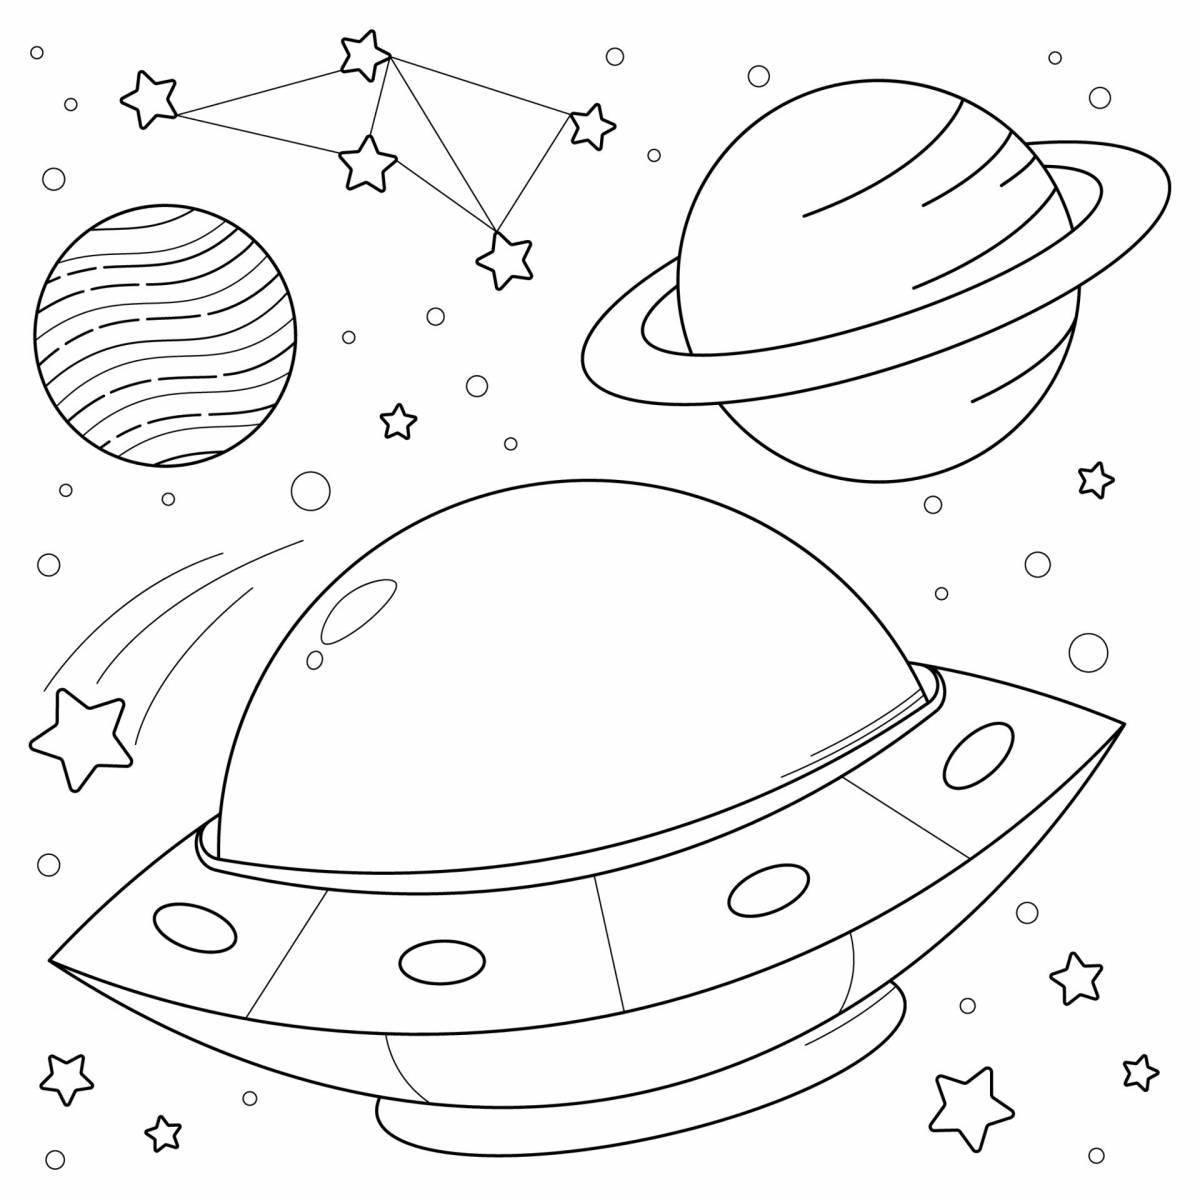 Adorable space coloring book for 3-4 year olds